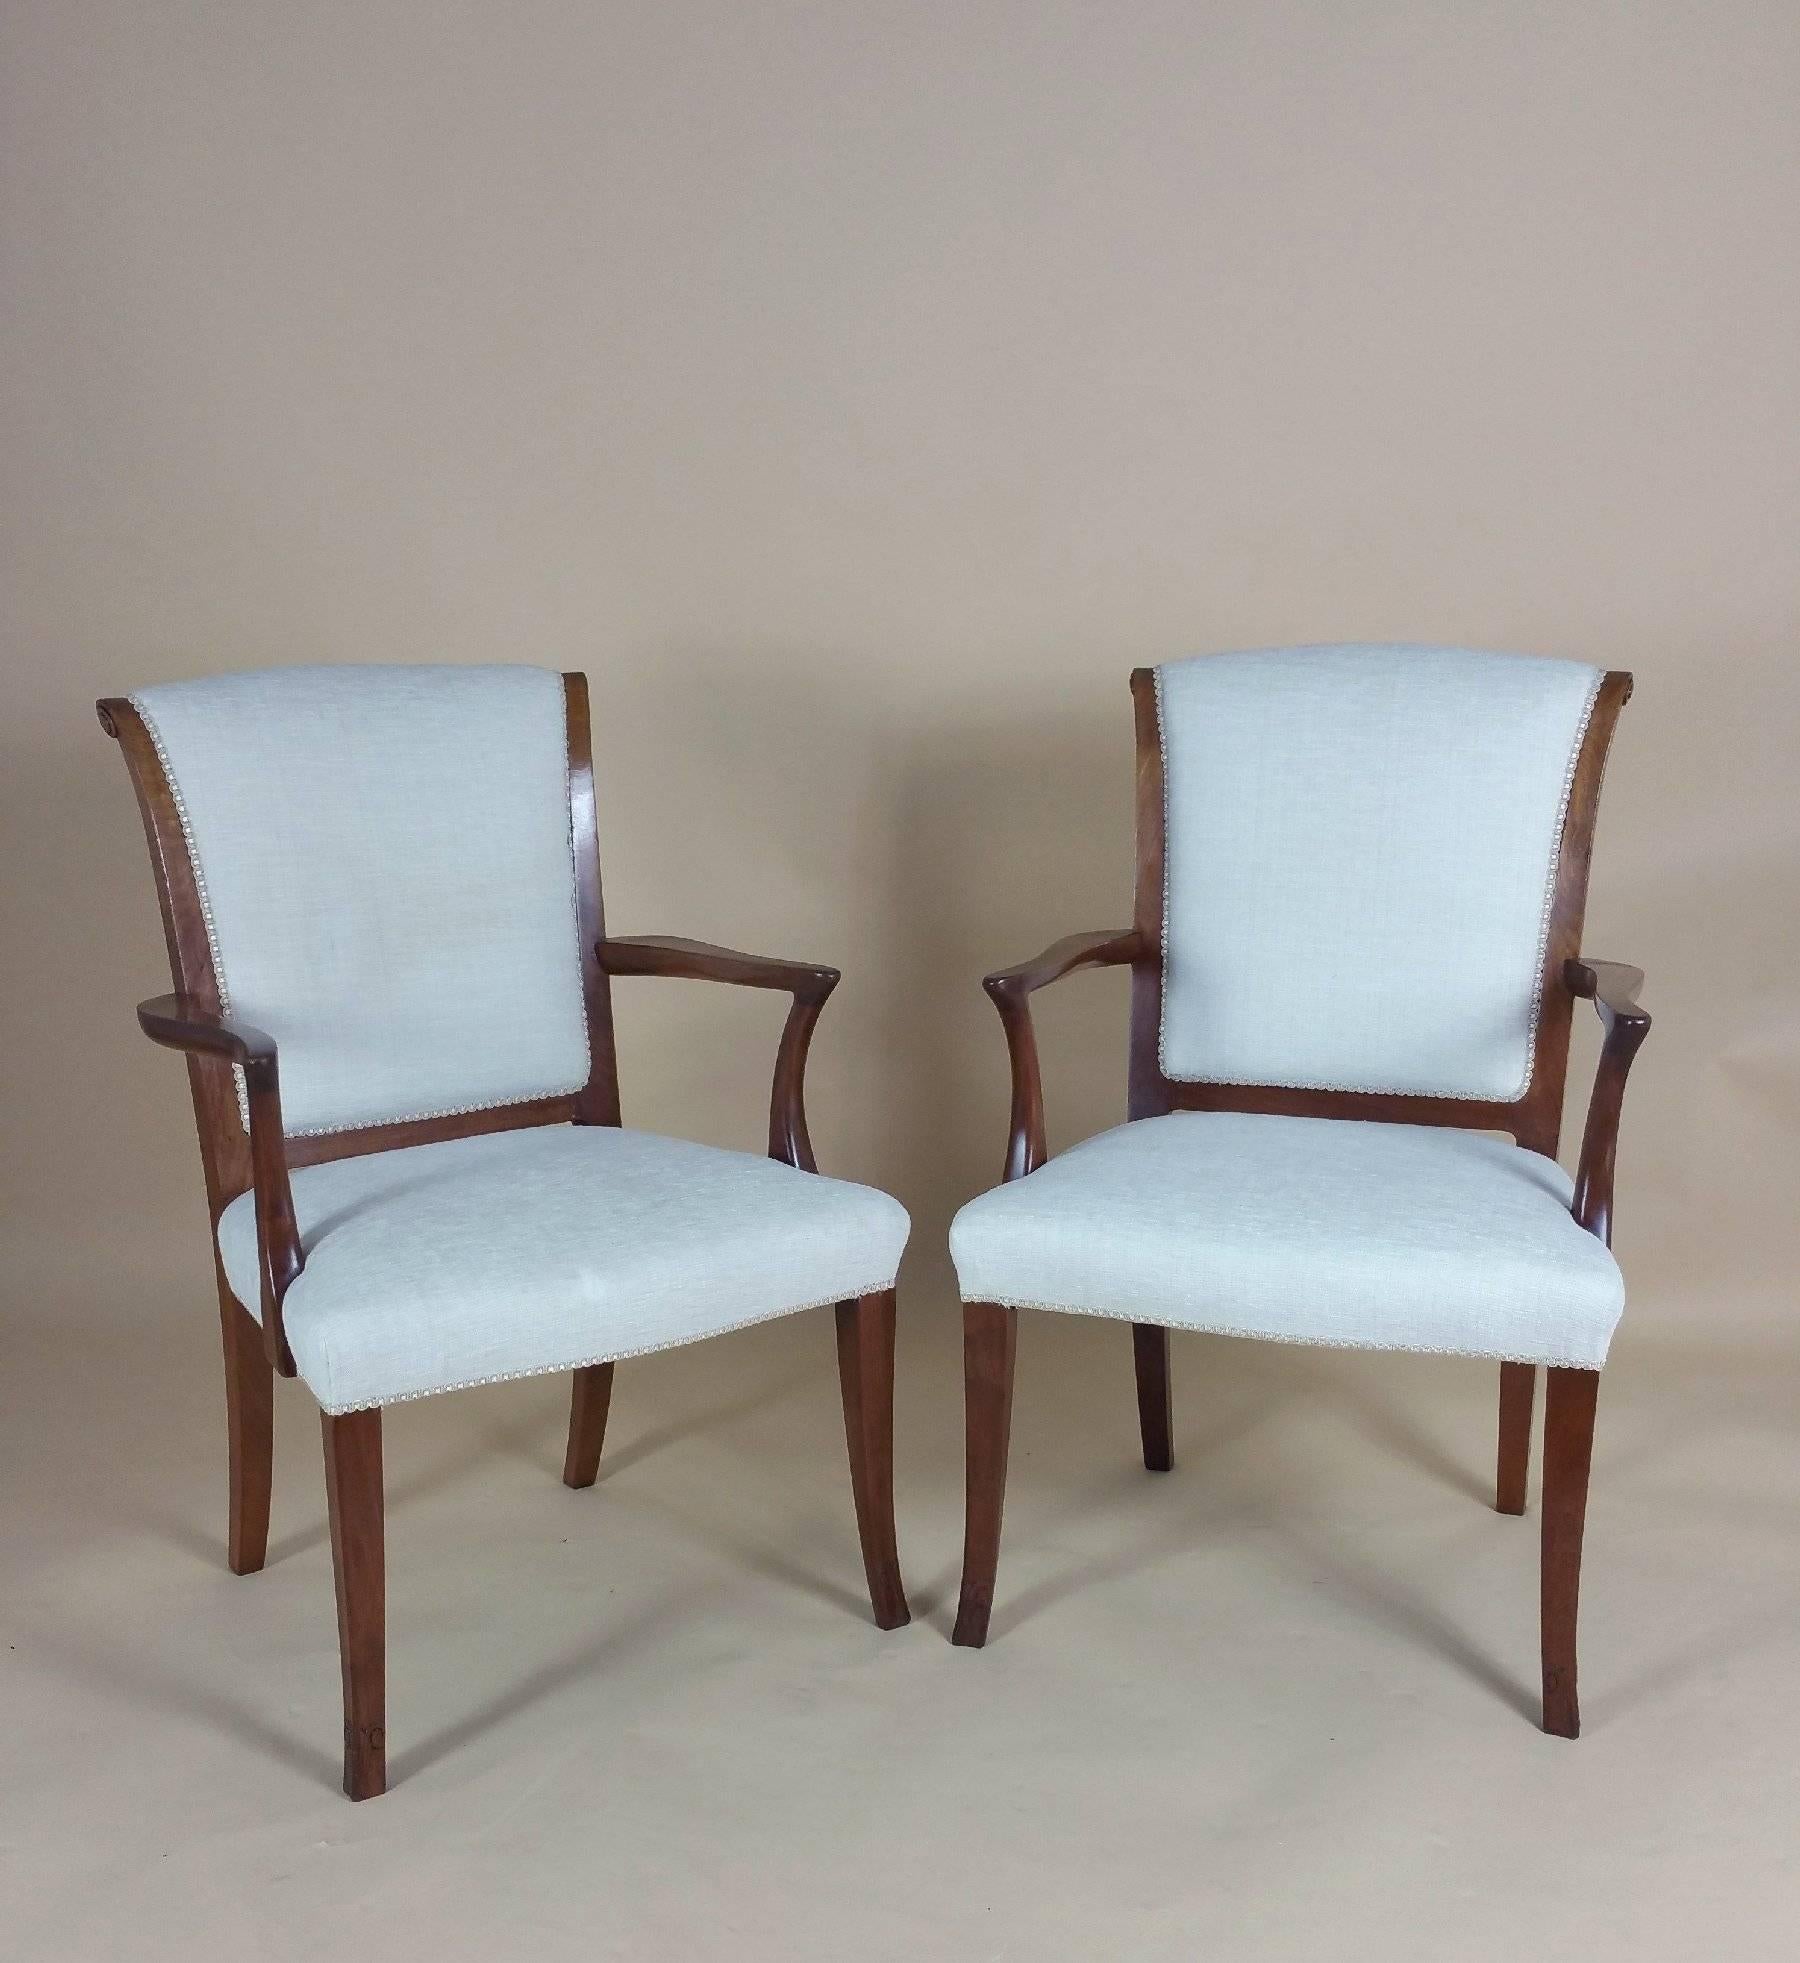 This lovely set of six teak 1930s elbow chairs are upholstered in an ivory woven material and feature carved detailing. Each chair measures 23 ¼ in - 59 cm wide, 21 in – 53.3 cm deep and 38 ½ in – 97.8 cm in height, with a seat height of 17 in- 43.2